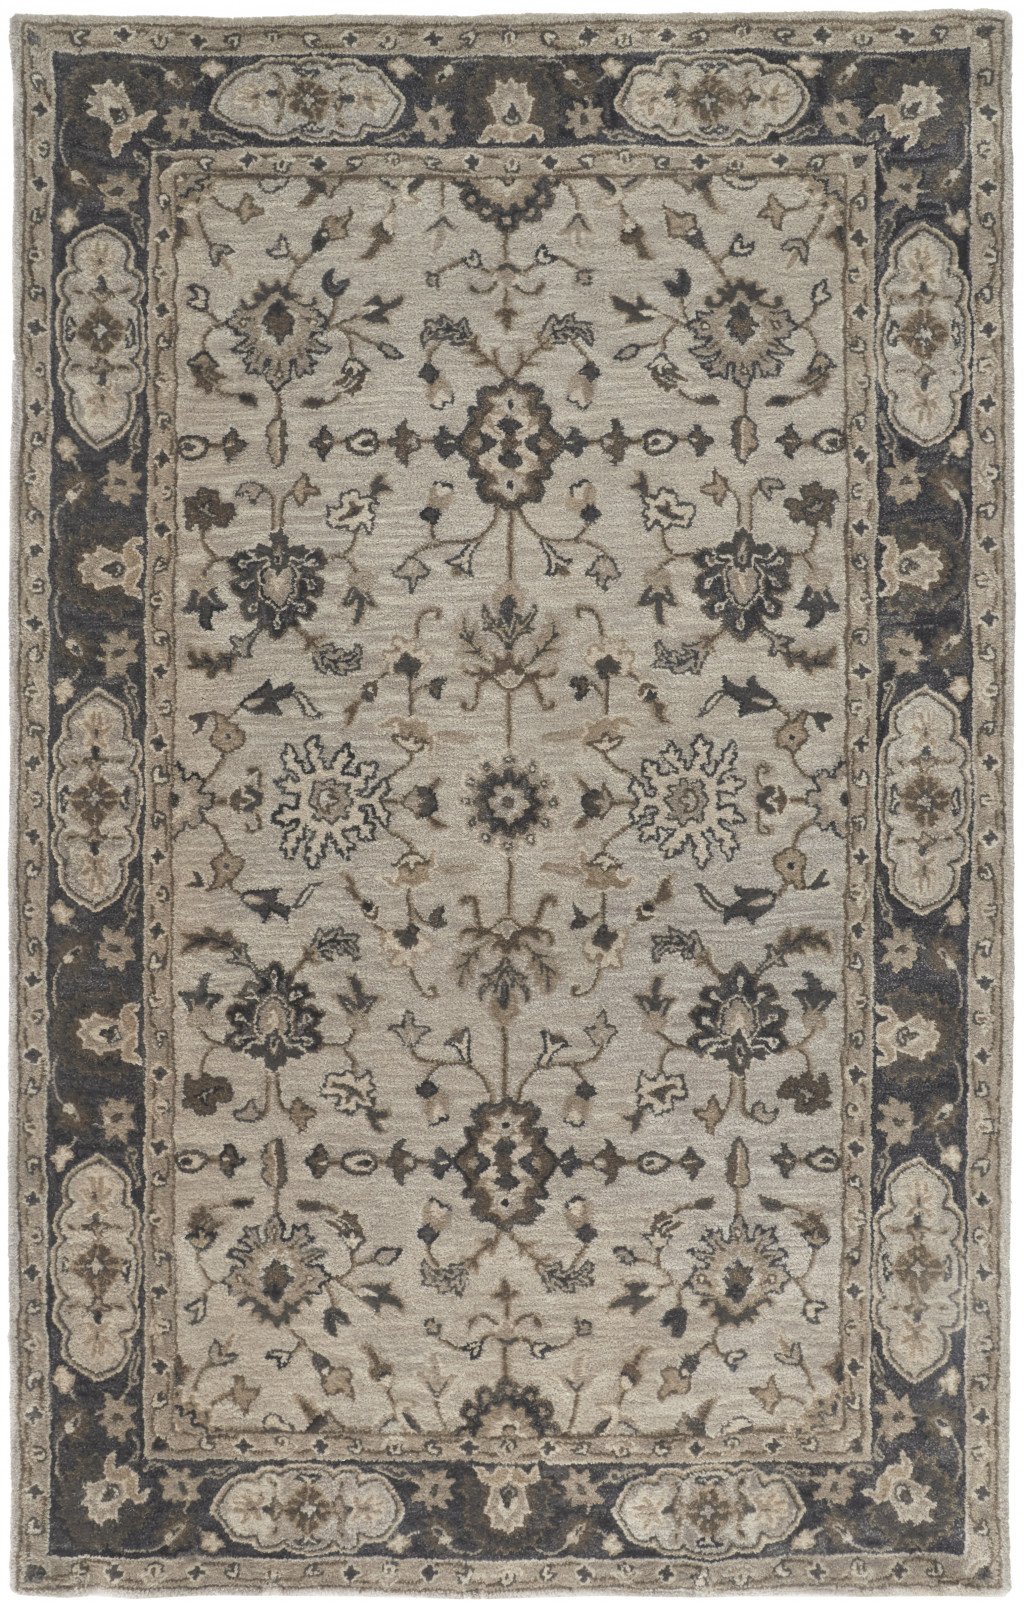 2' X 3' Gray Ivory And Taupe Wool Floral Tufted Handmade Stain Resistant Area Rug-511279-1